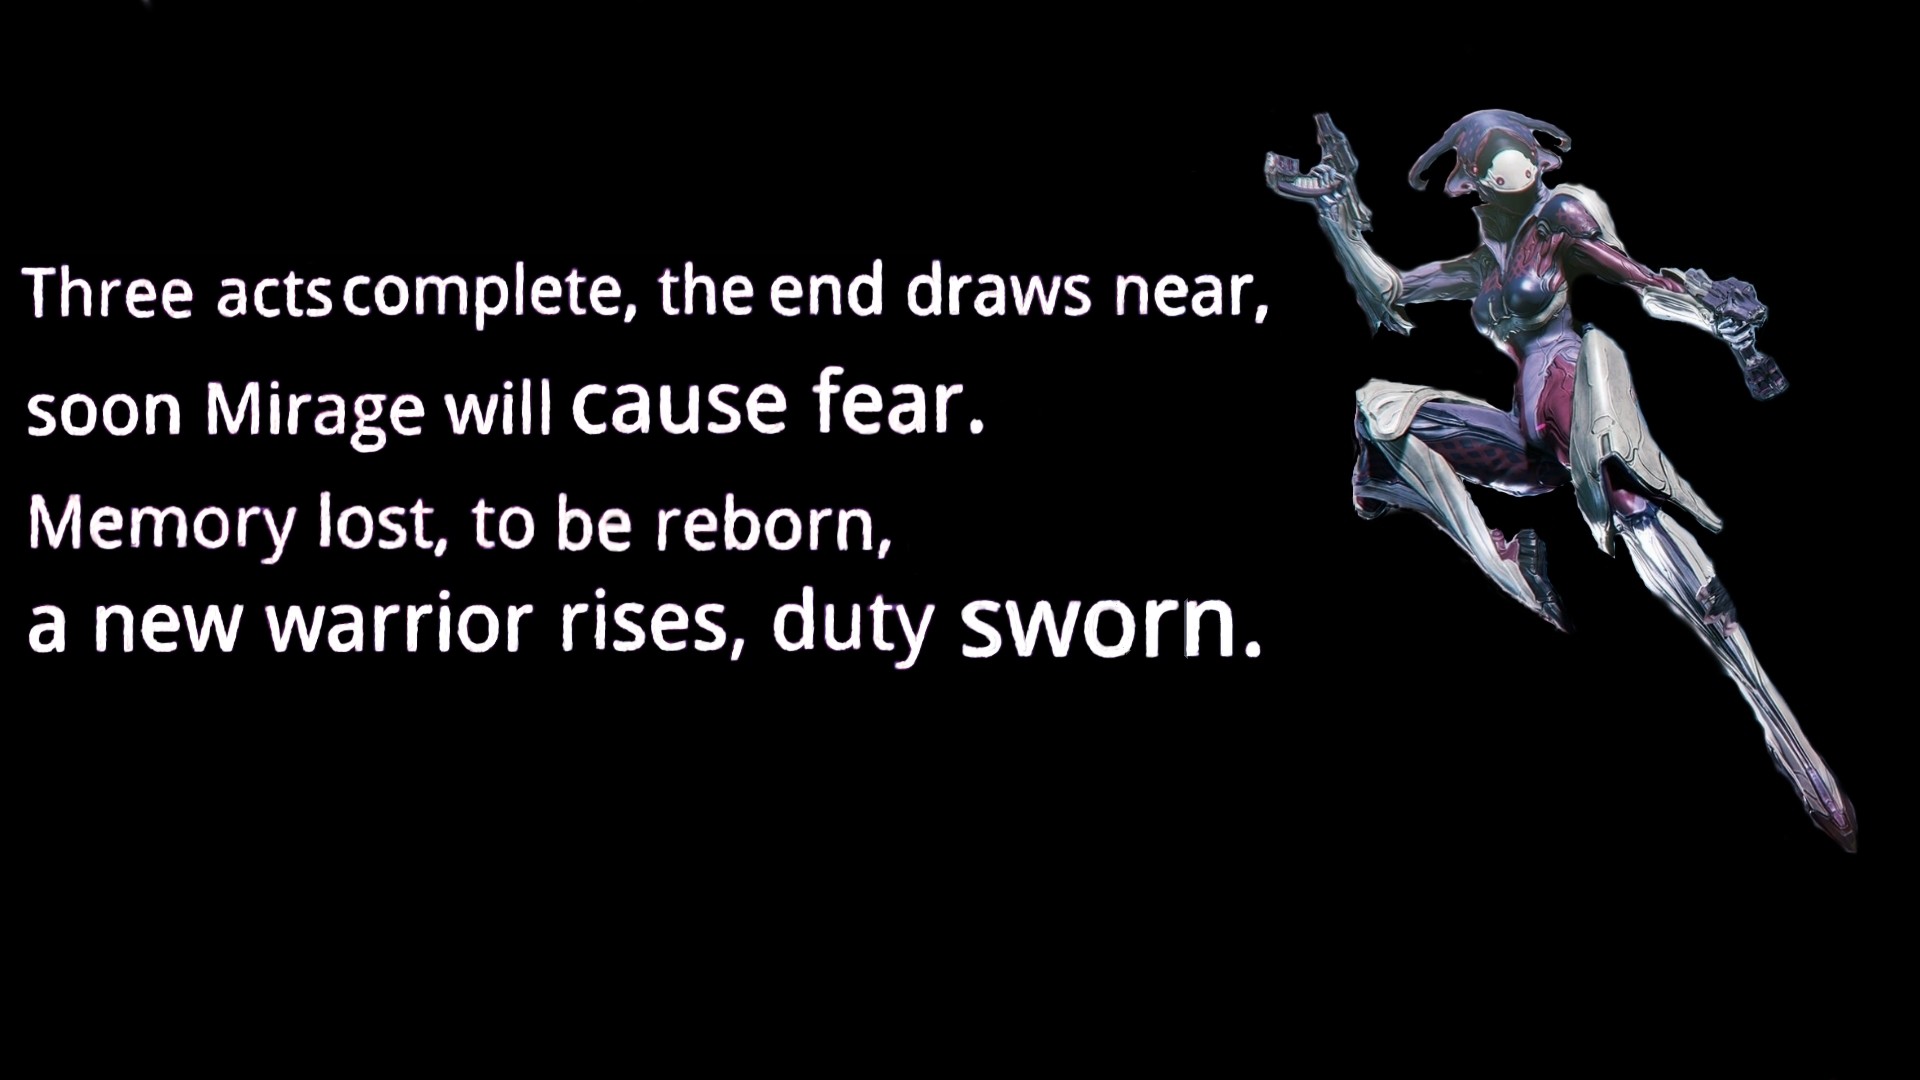 Anime 1920x1080 Warframe anime typography mechs PC gaming simple background black background